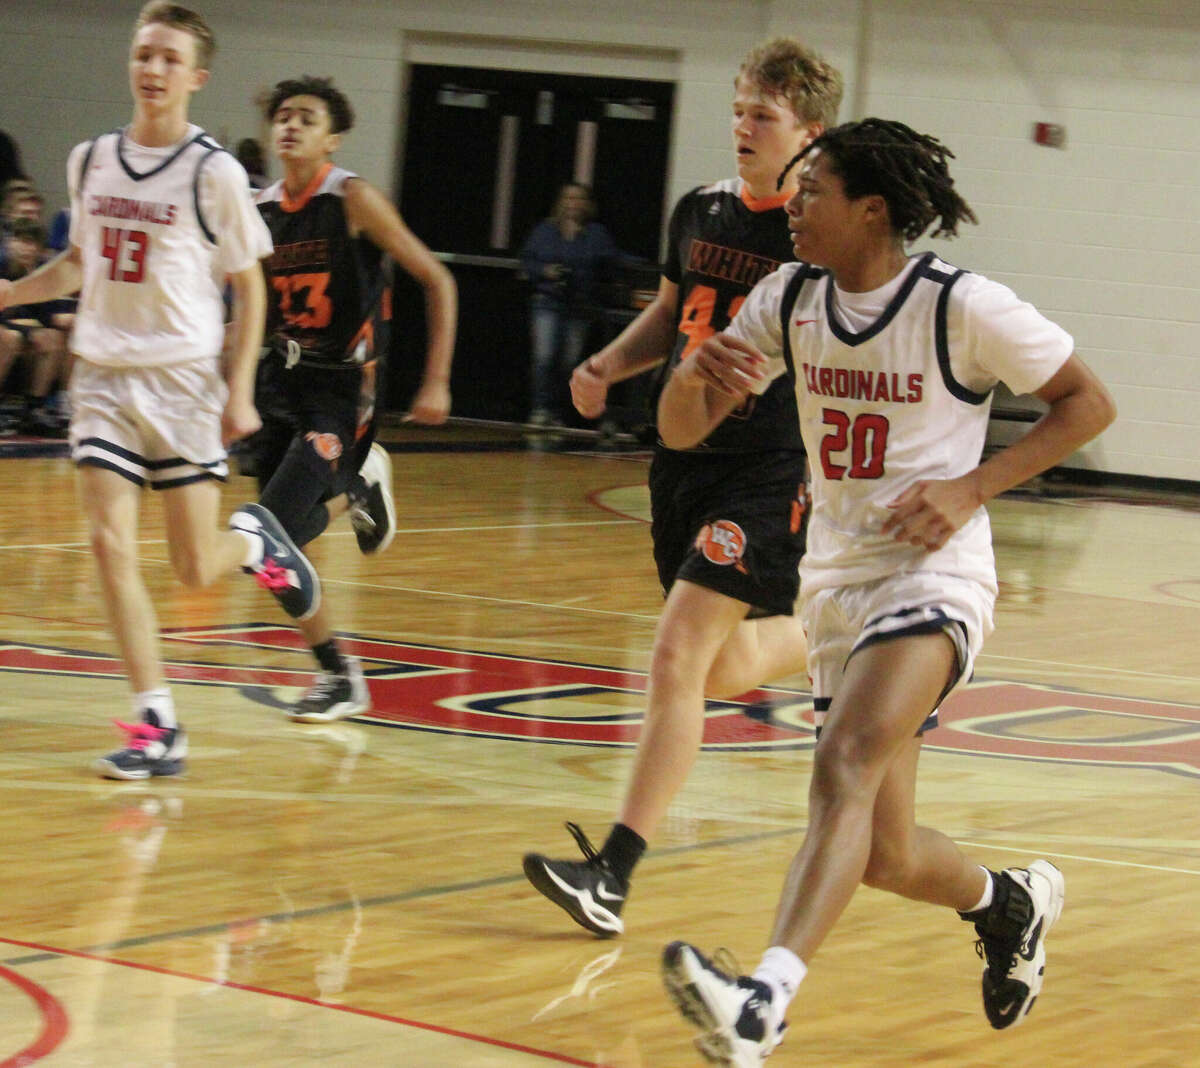 Big Rapids' Karlito McKinney (20) hustles down the court during Friday action against White Cloud.